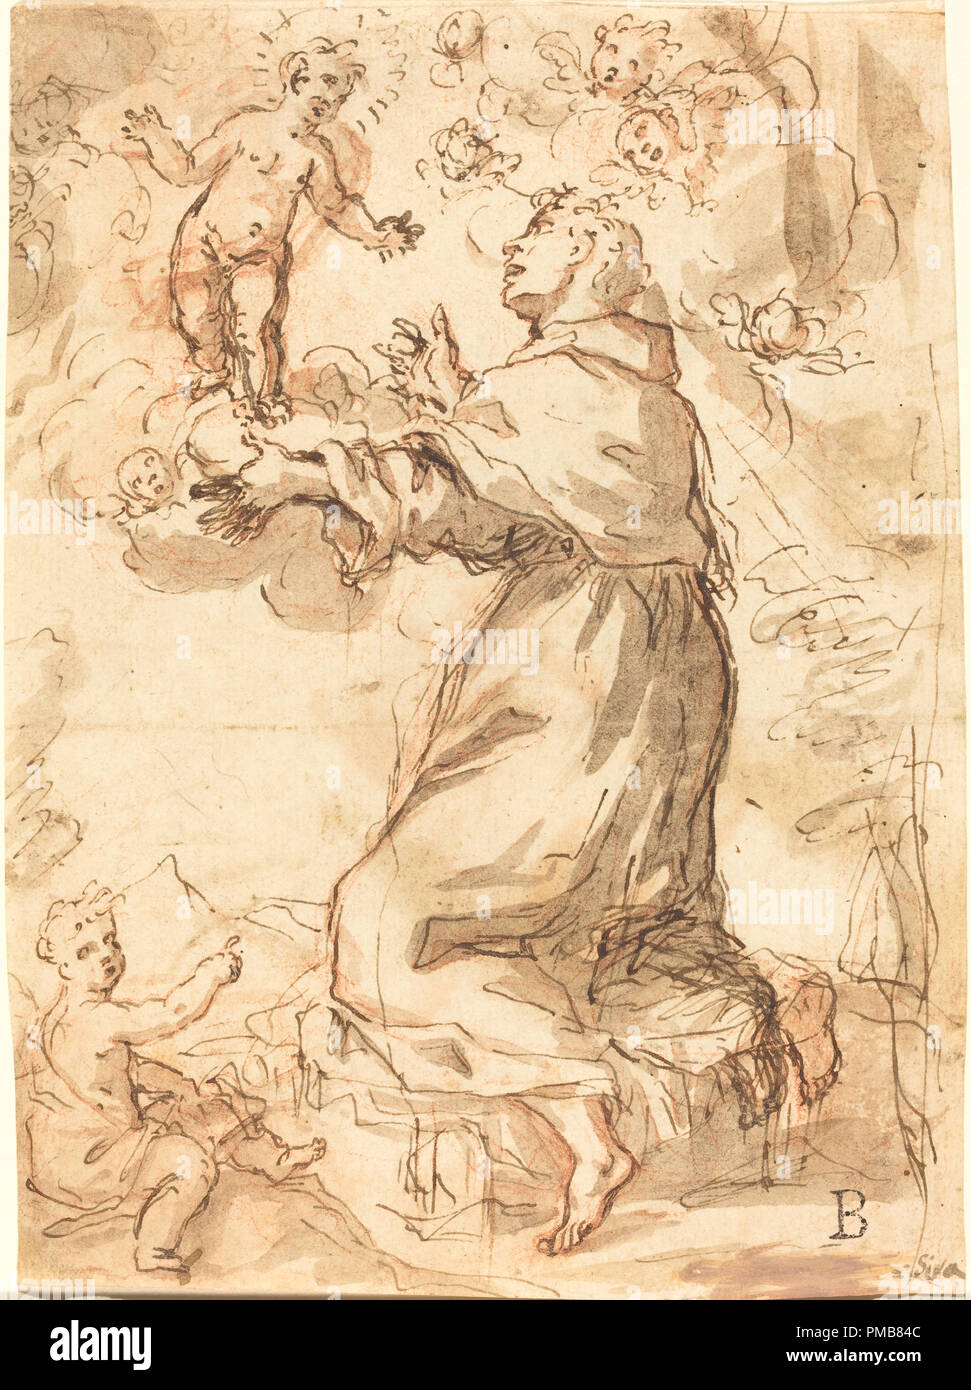 The Christ Child Appearing to Saint Francis. Dimensions: sheet: 17.9 x 13 cm (7 1/16 x 5 1/8 in.). Medium: pen and brown ink with gray-brown wash over red chalk on laid paper. Museum: National Gallery of Art, Washington DC. Author: Venetian 17th Century. Stock Photo